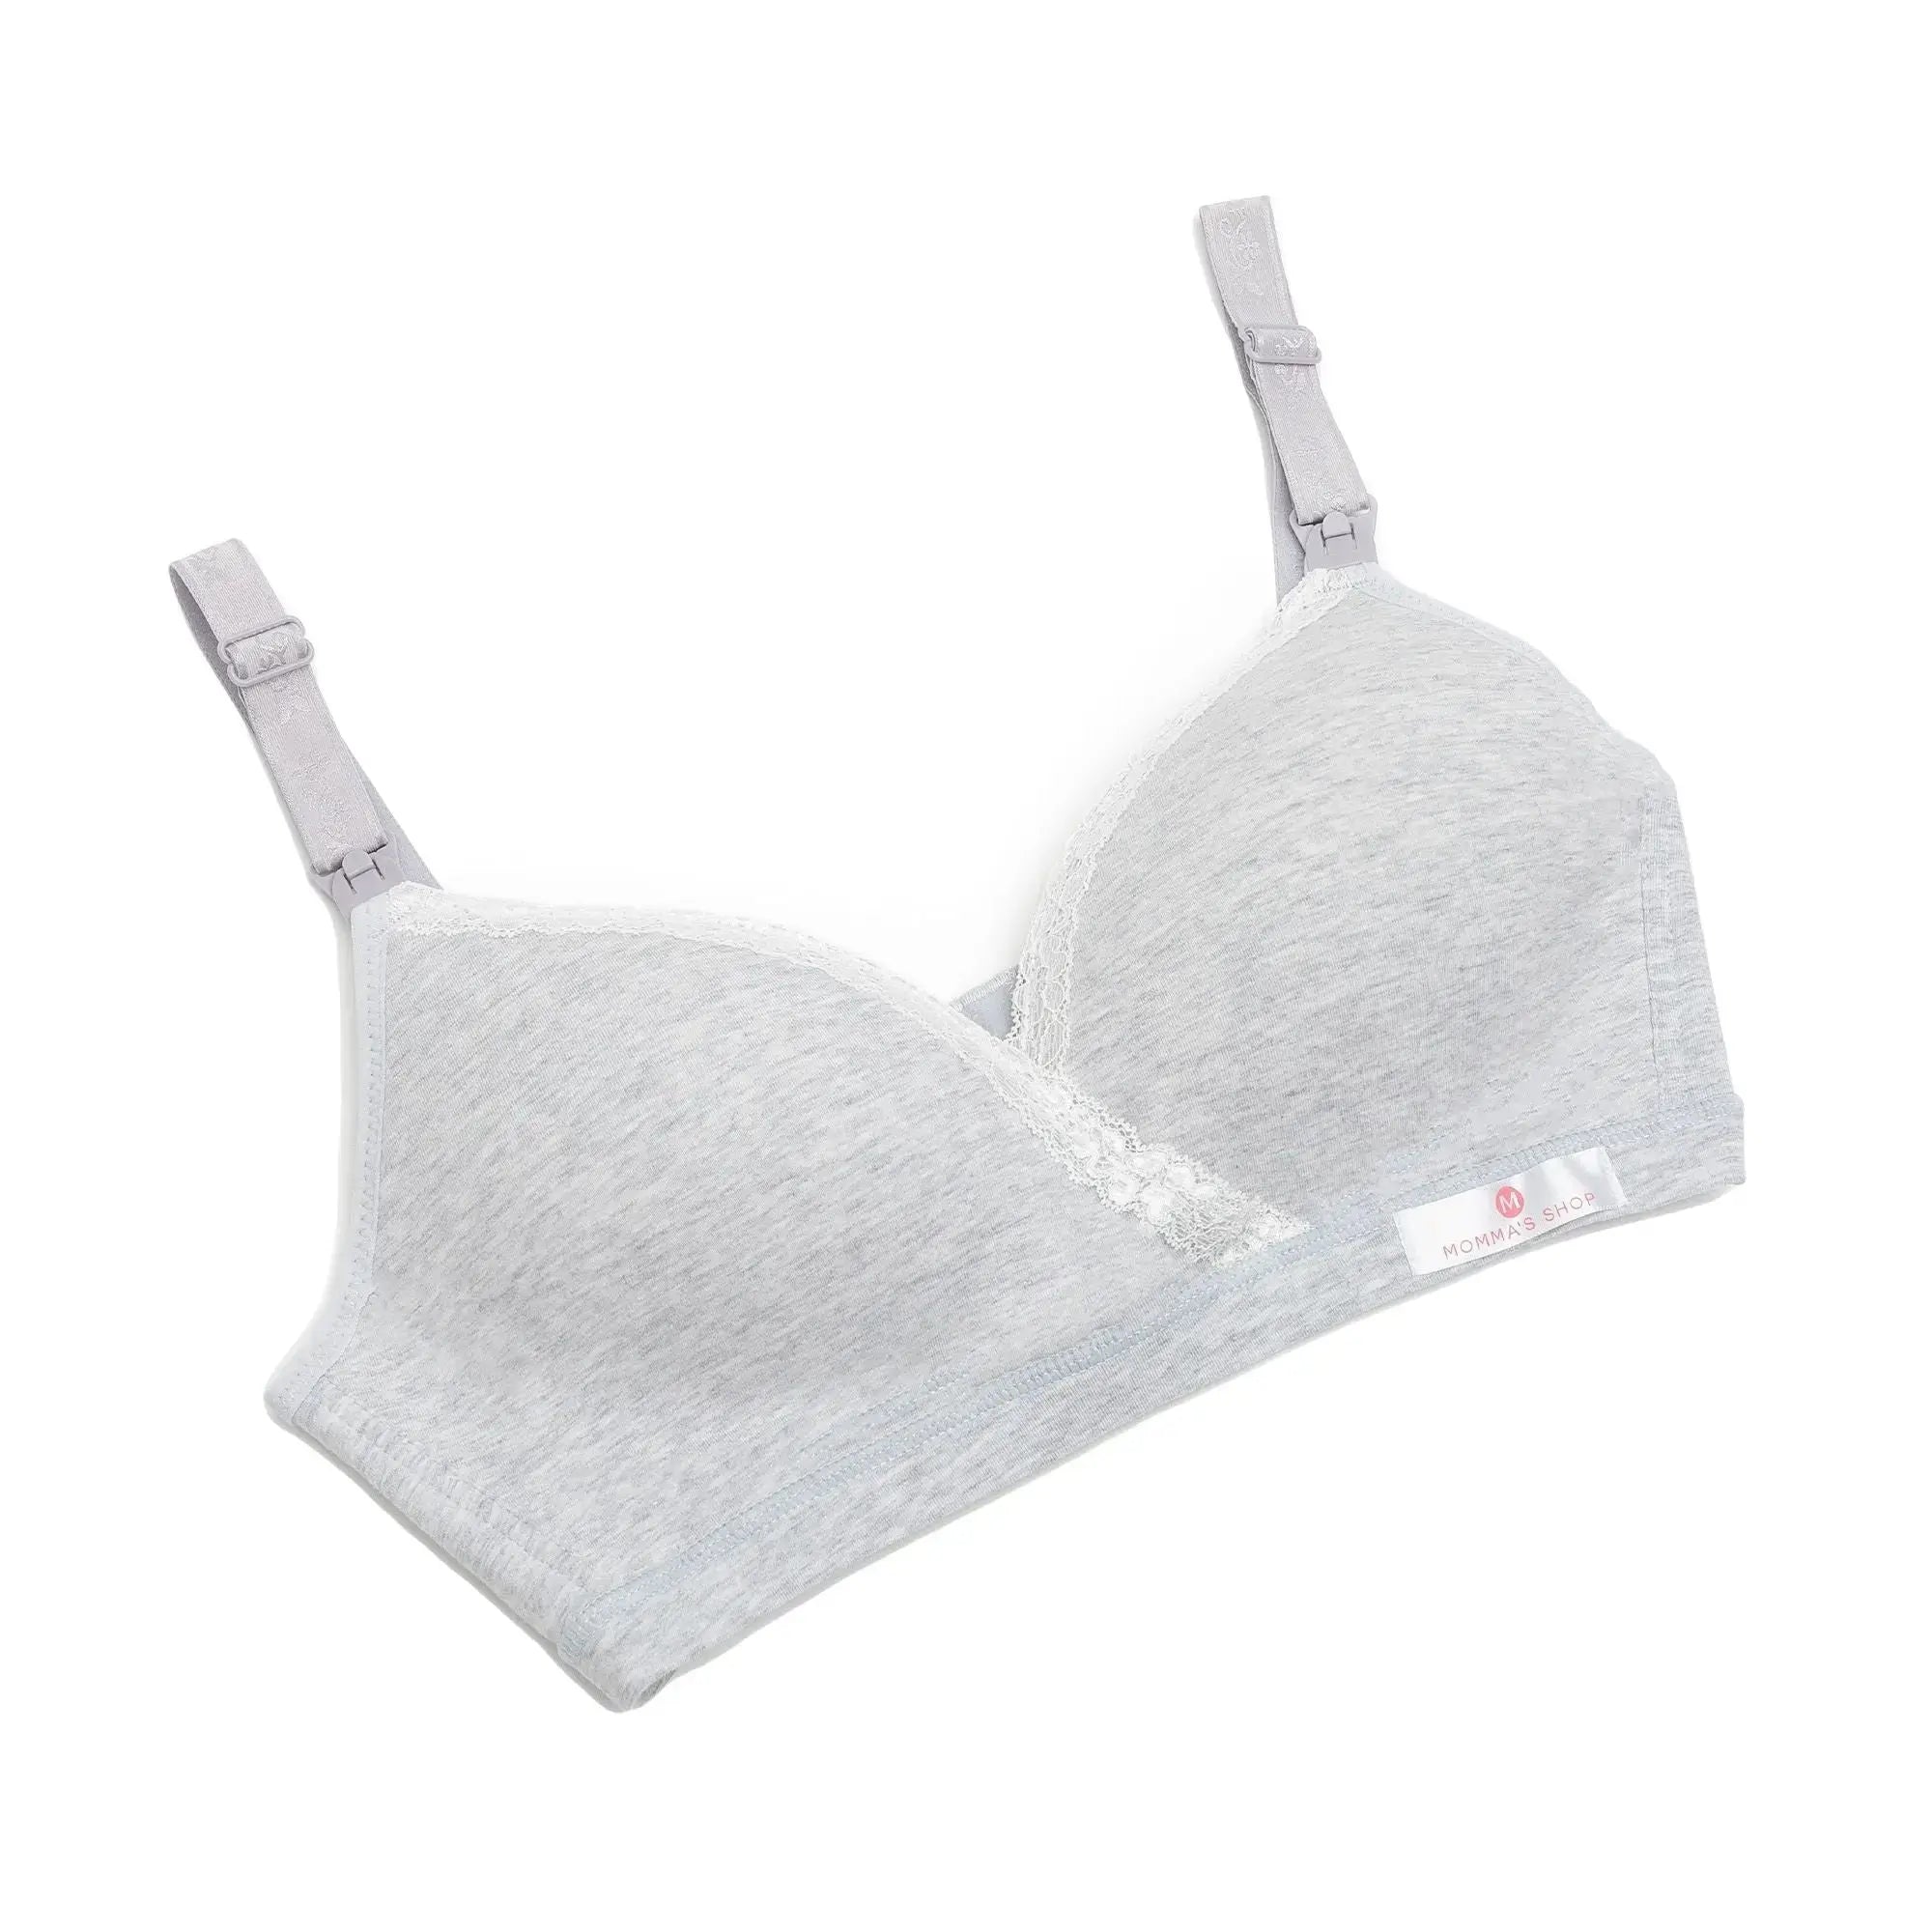 Target Maternity Bras for Women for sale, Shop with Afterpay